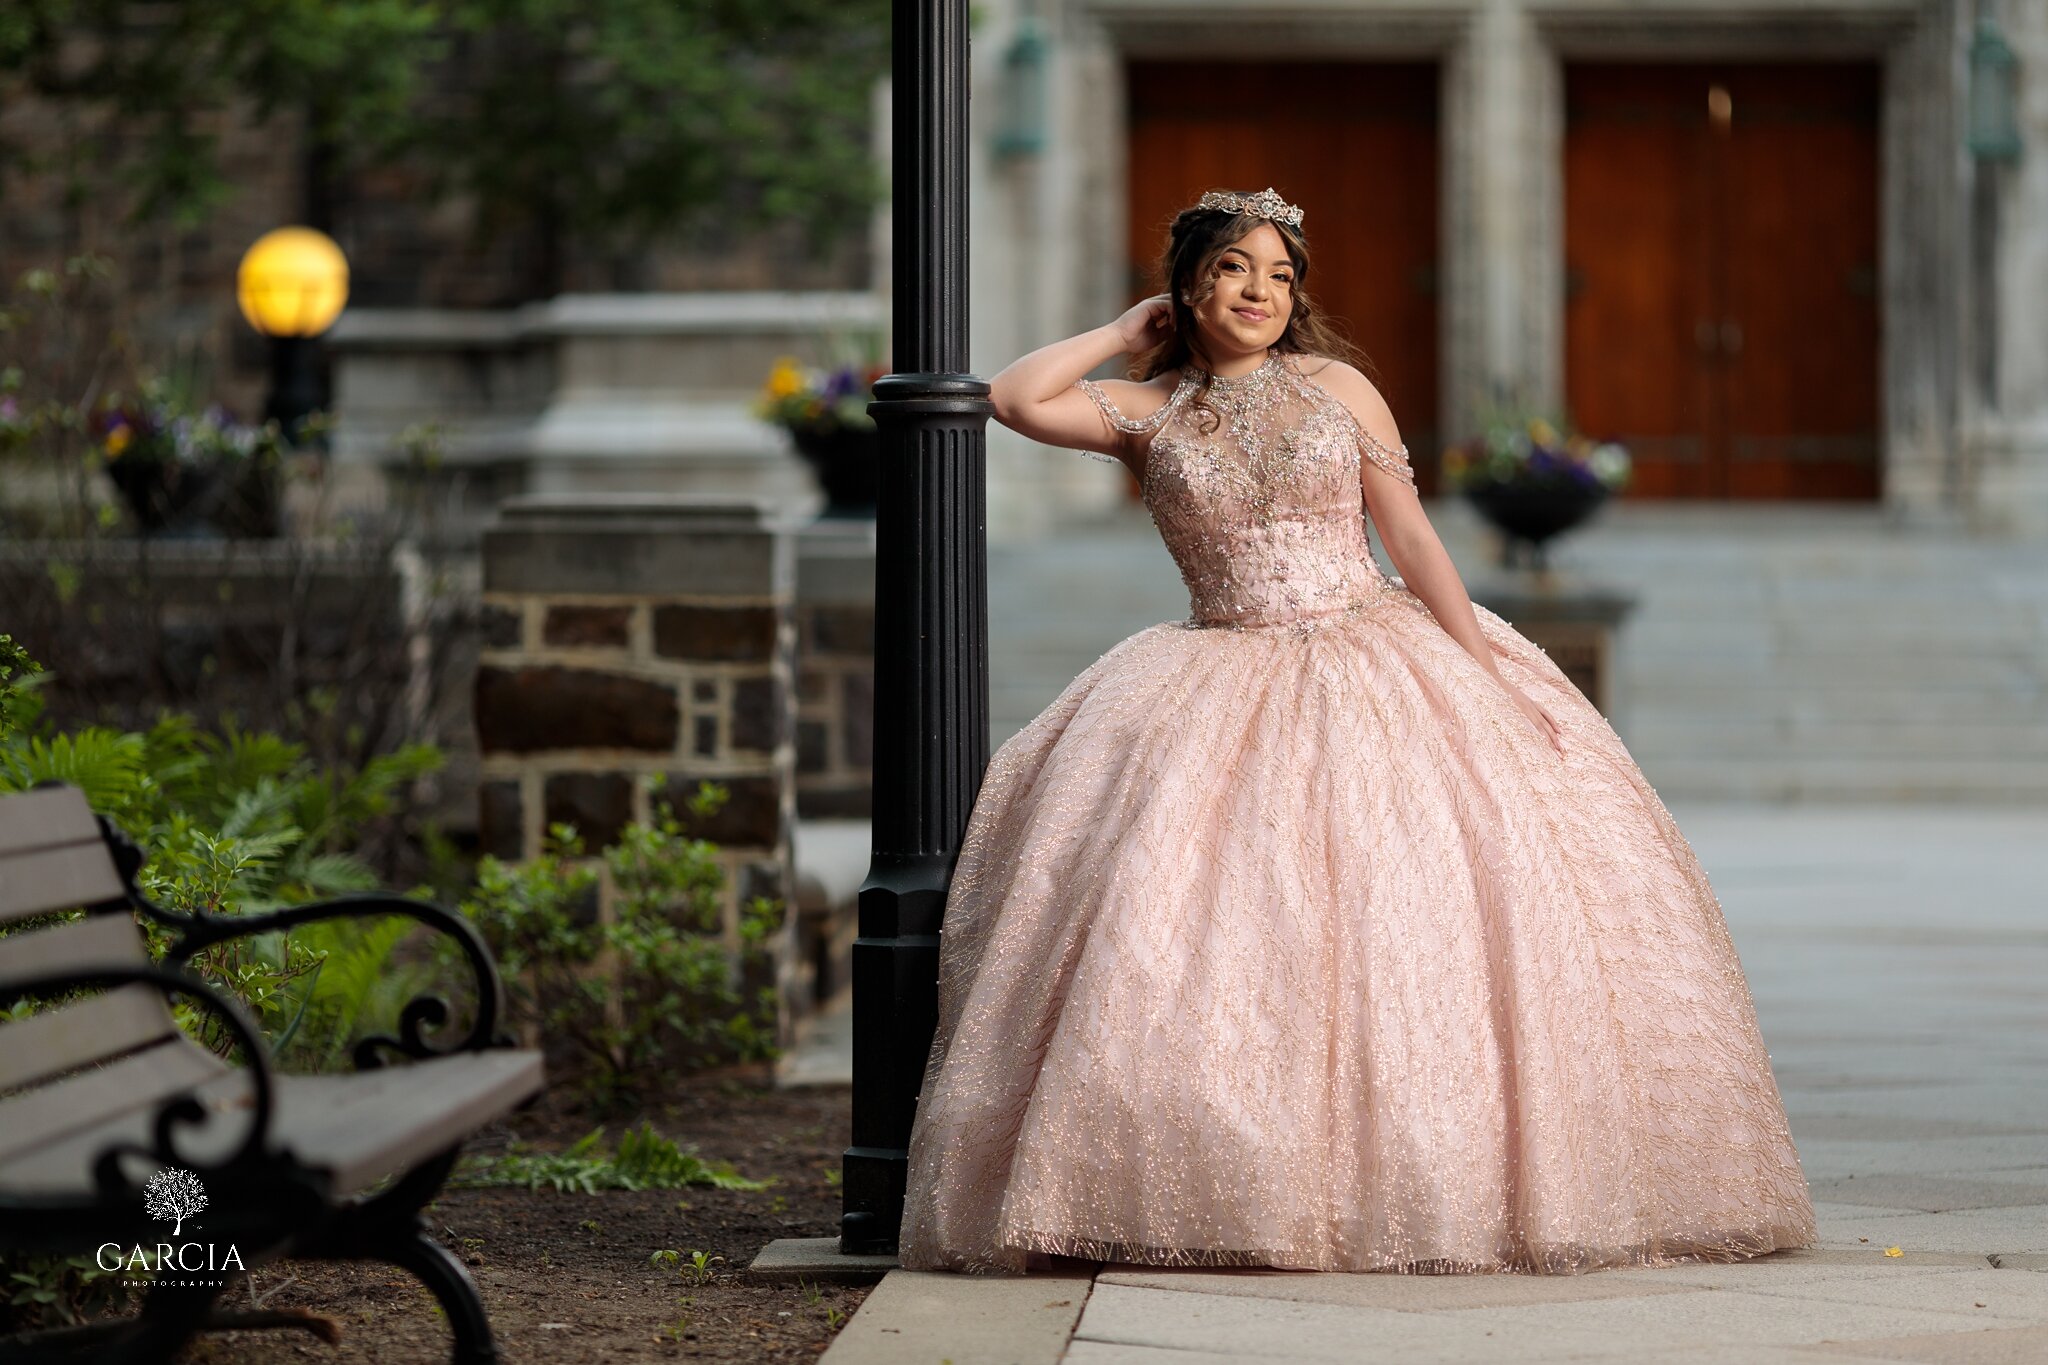 Alana-Quince-Session-Garcia-Photography-9201.jpg